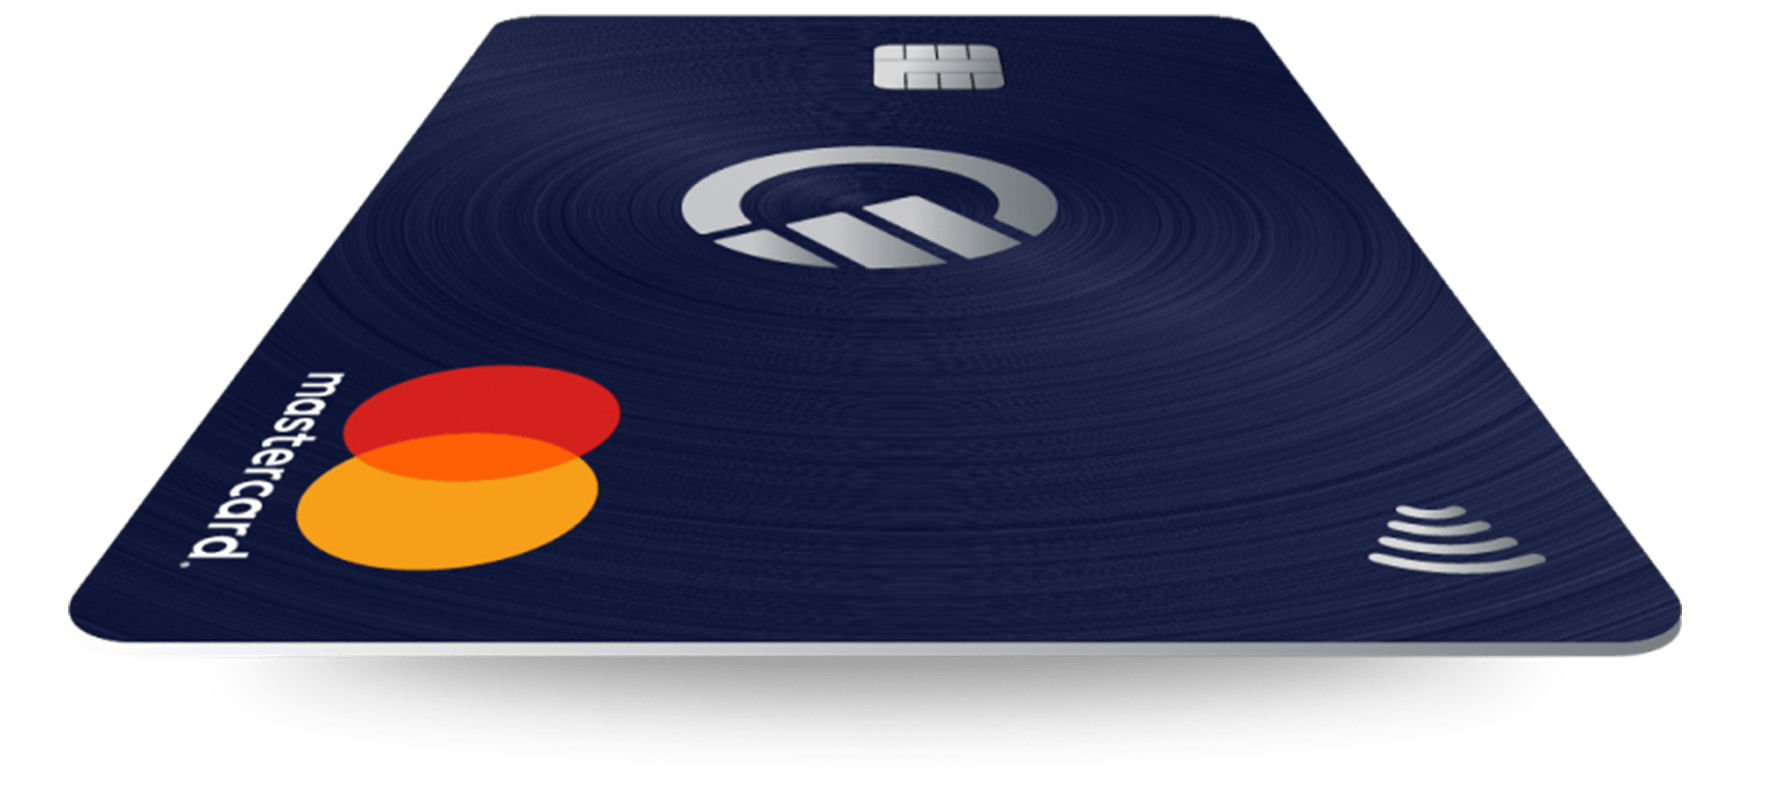 Curve: One card for all your accounts